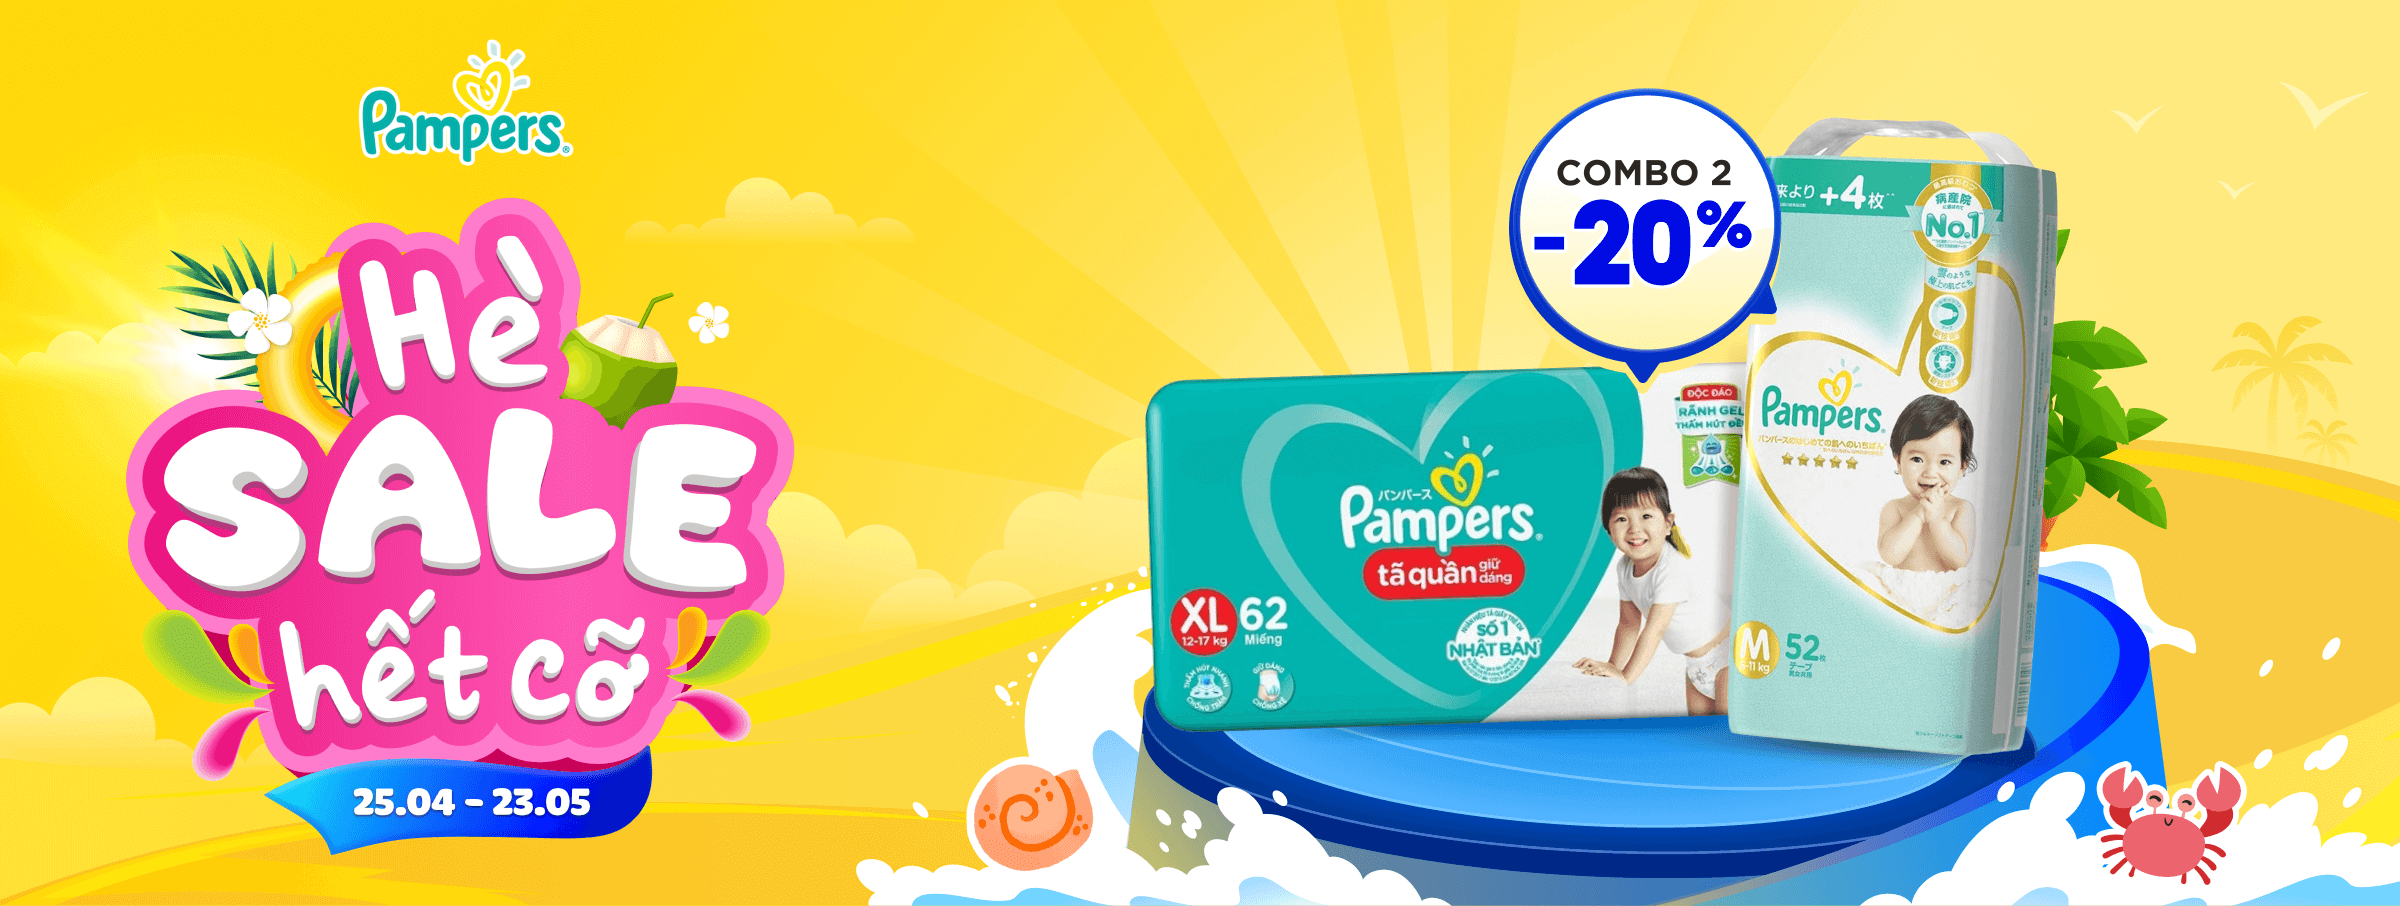 Pampers T05 - CATE